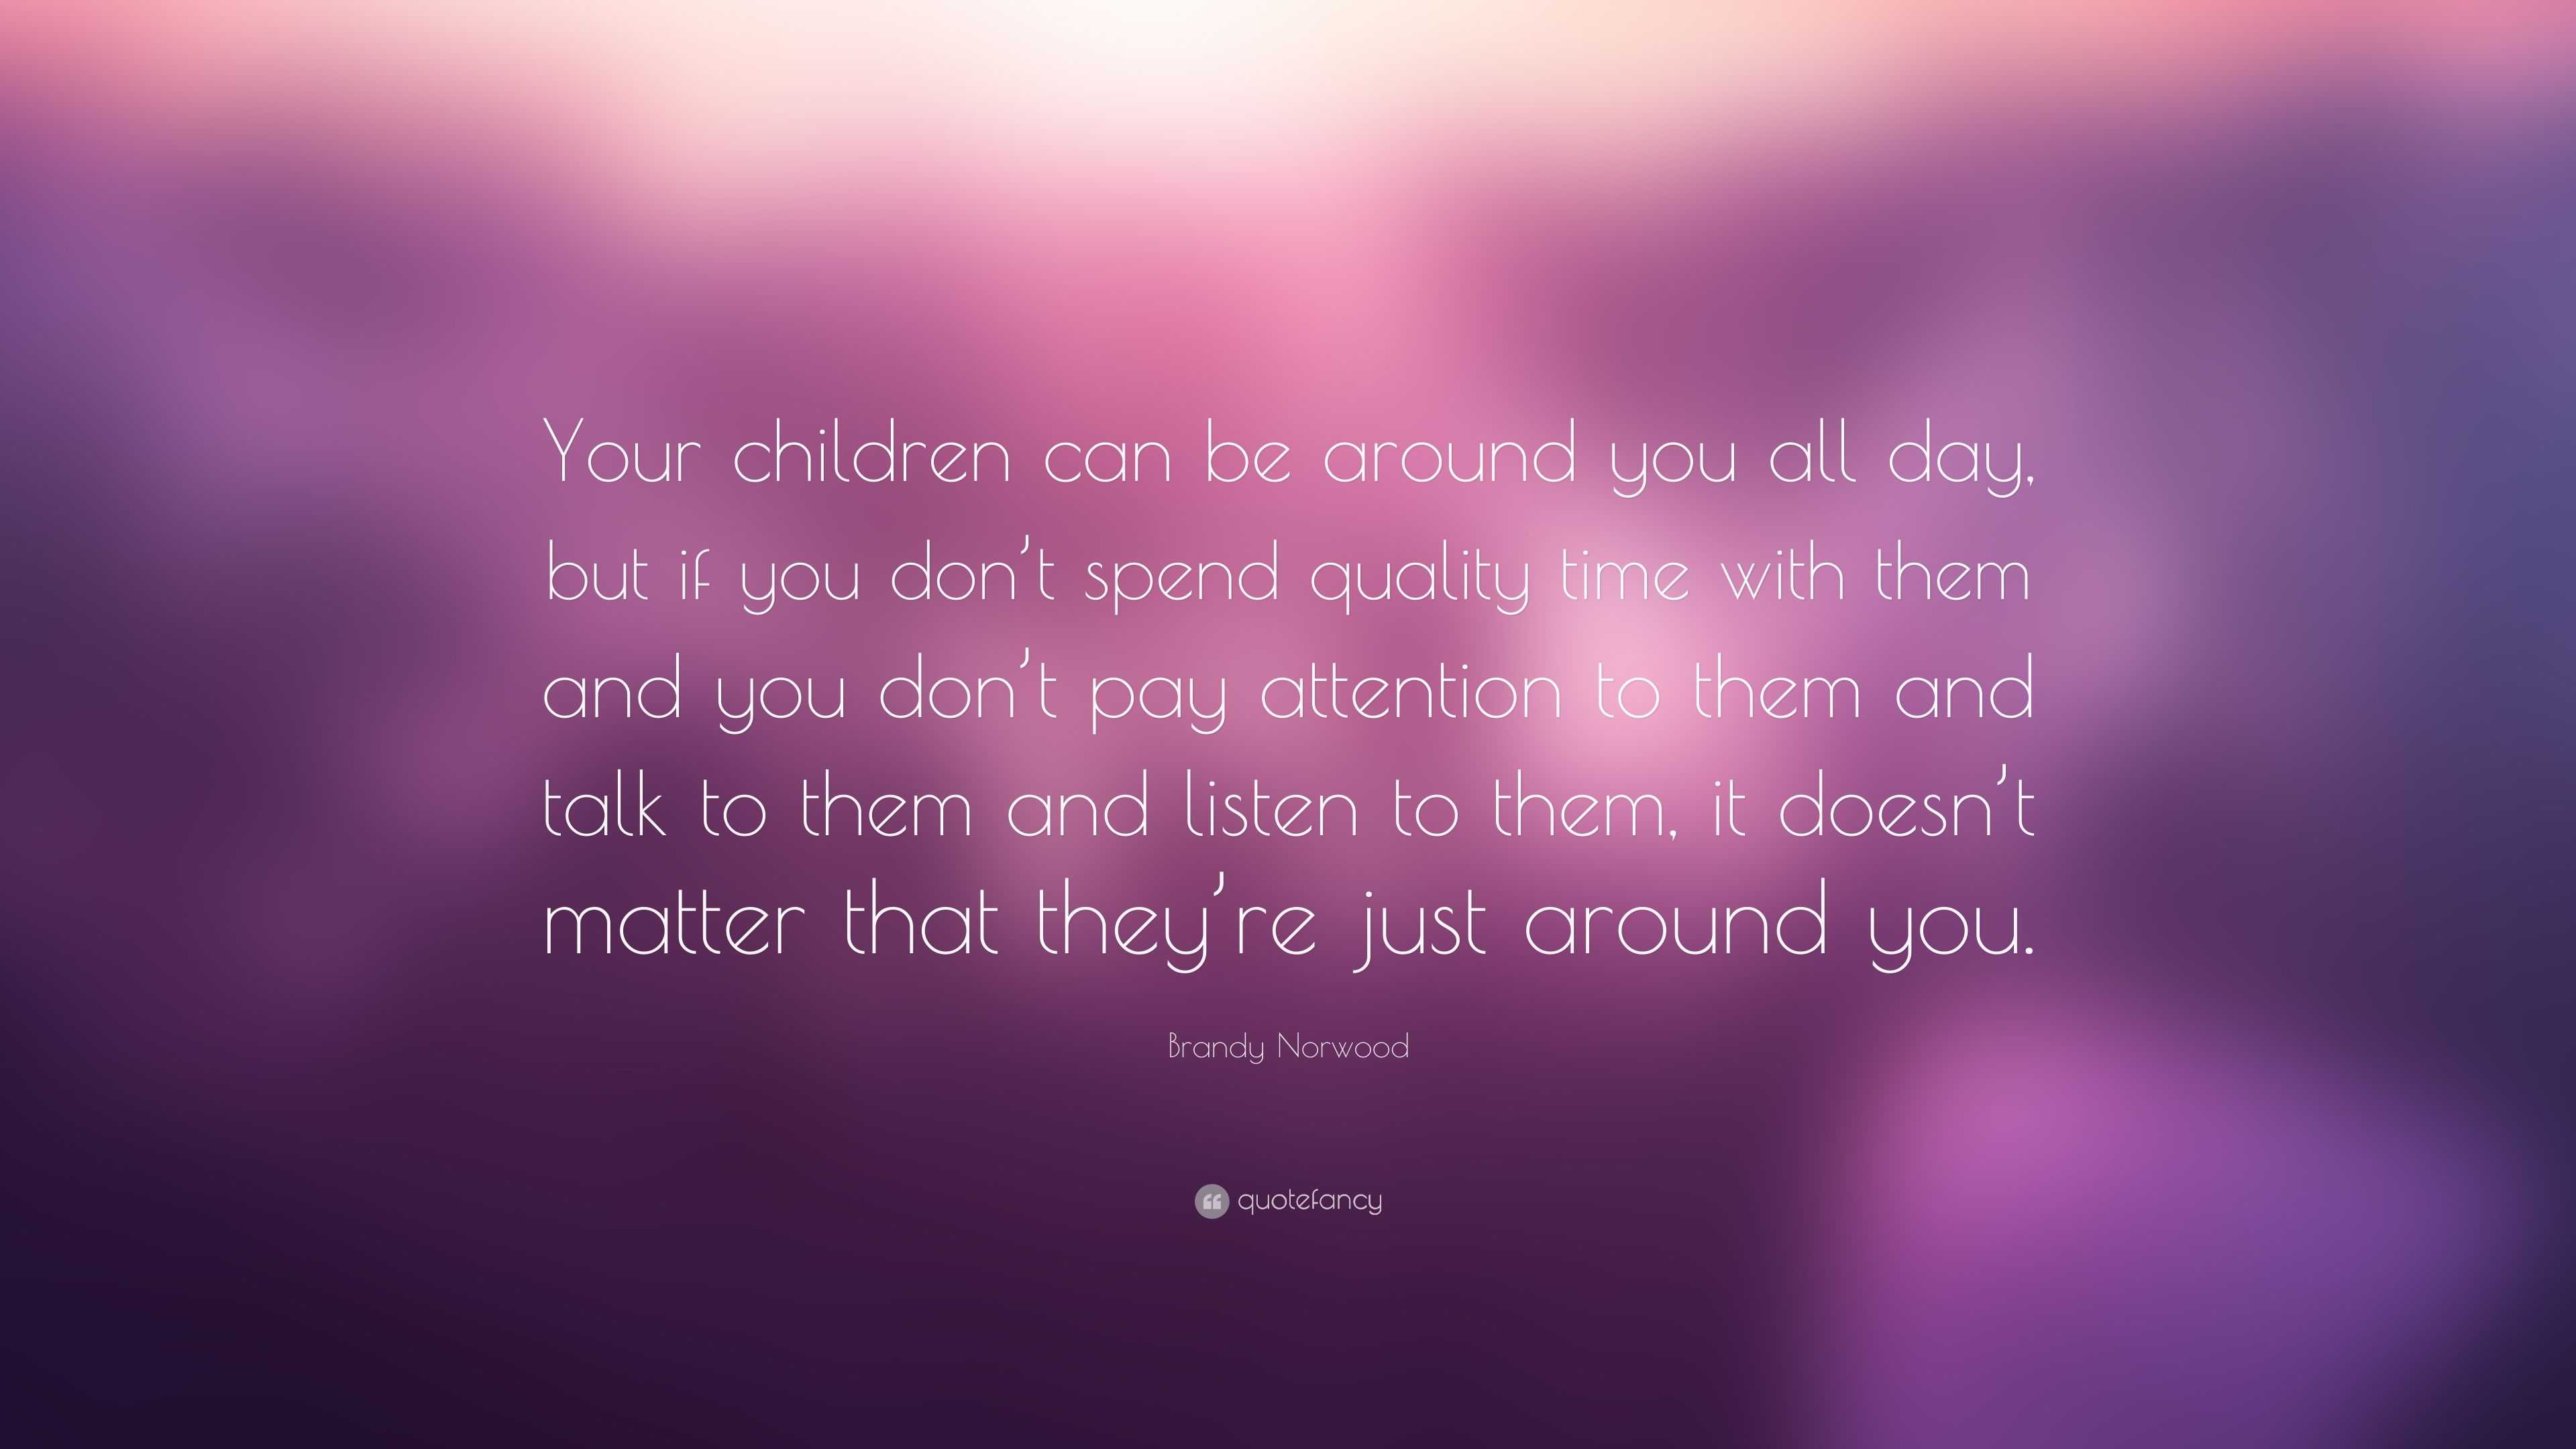 Brandy Norwood Quote: “Your children can be around you all day, but if ...